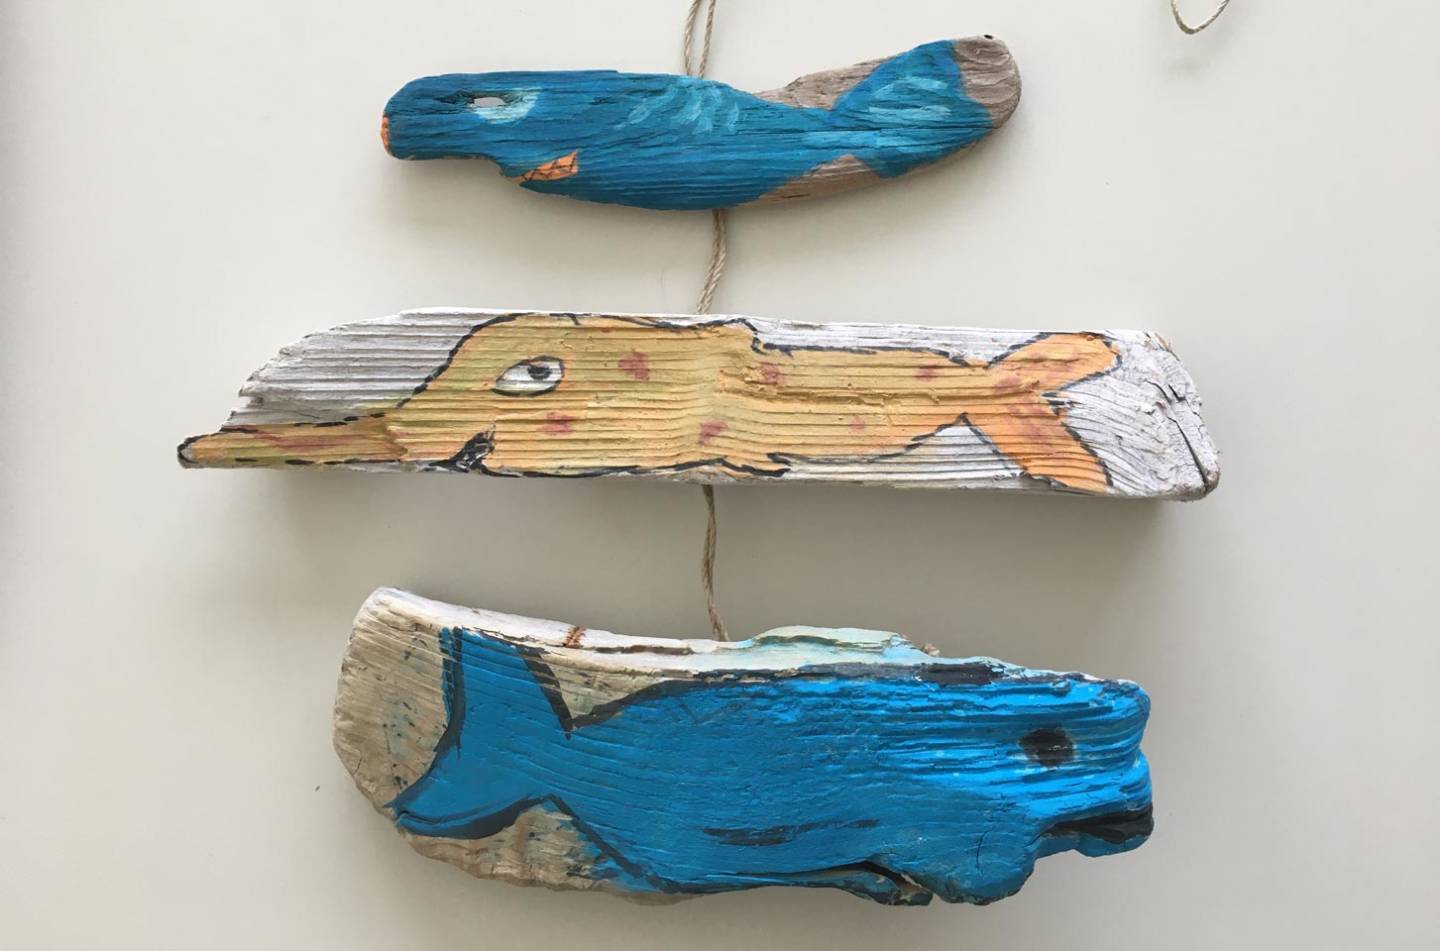 Pieces of wood and stones painted with fish